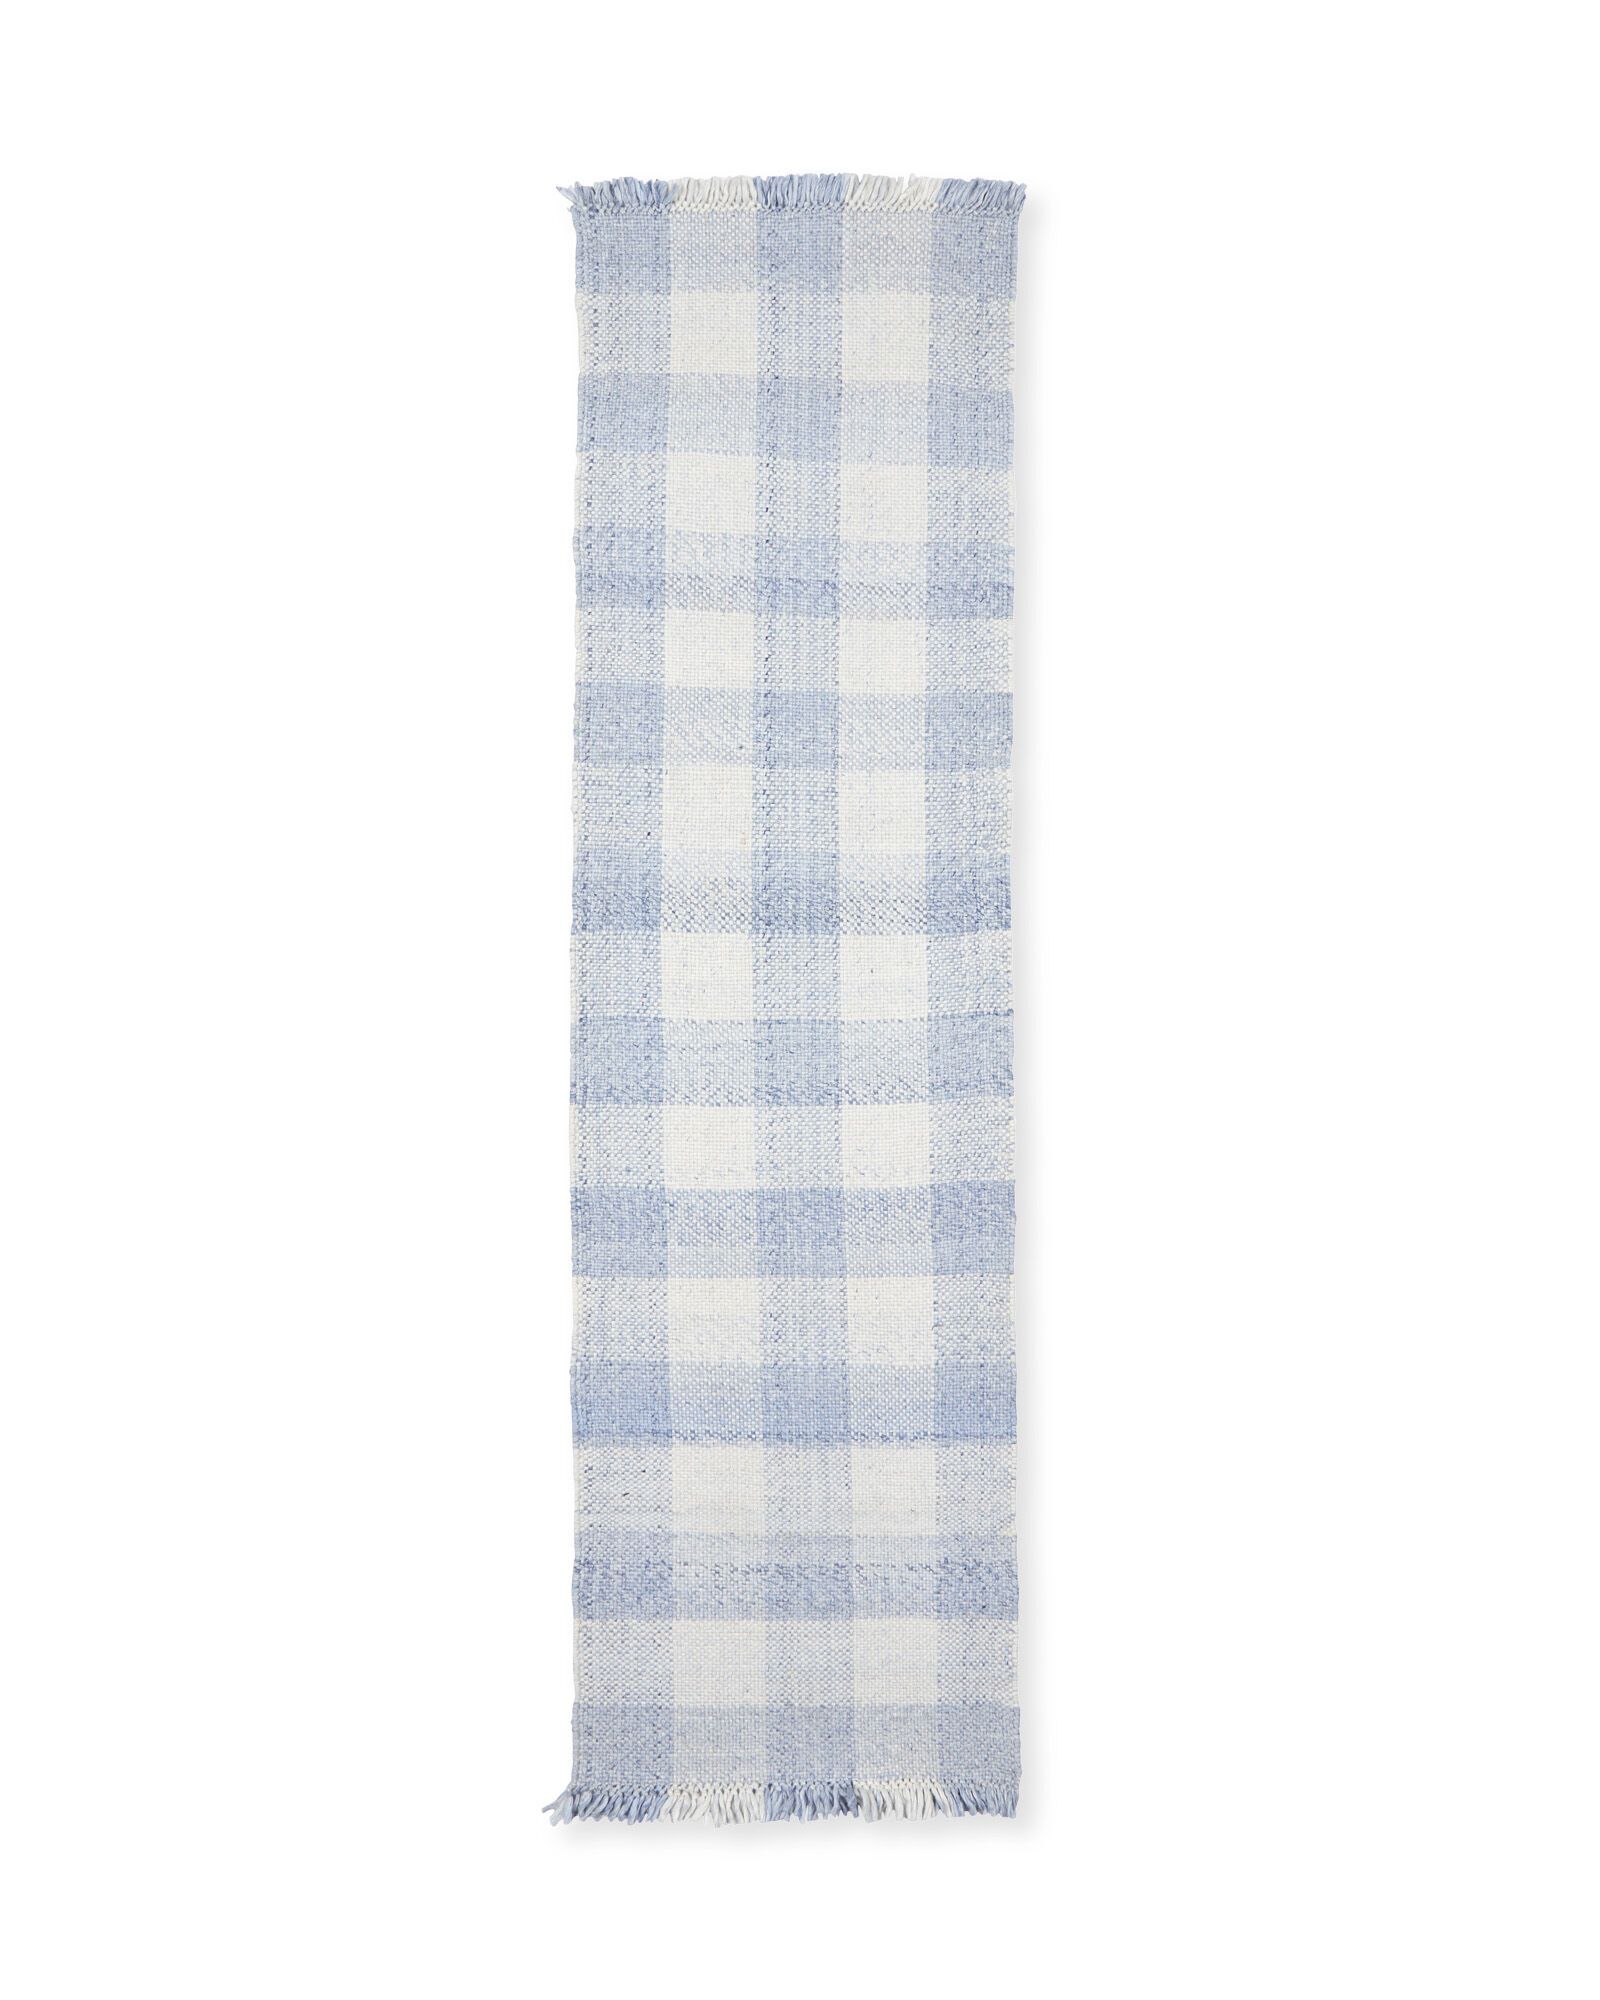 Gingham Rug | Serena and Lily